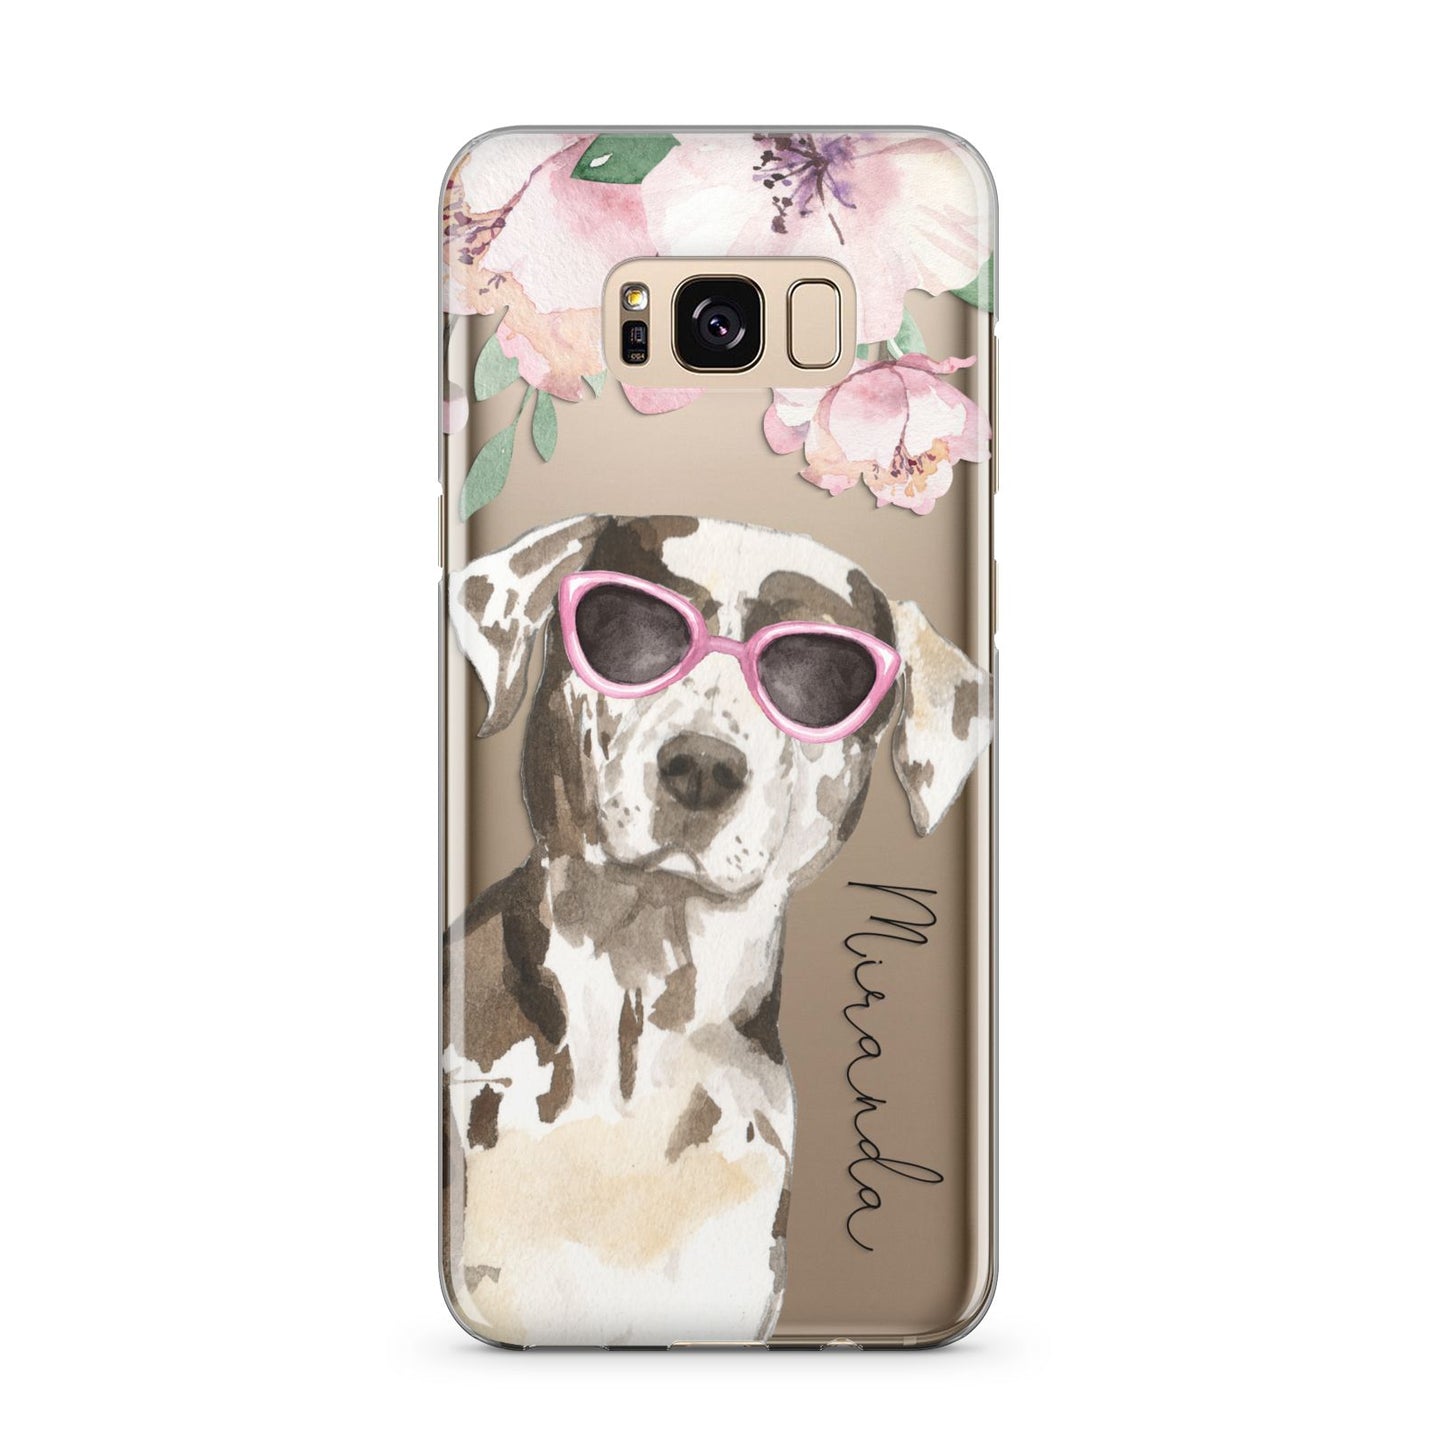 Personalised Catahoula Leopard Dog Samsung Galaxy S8 Plus Case